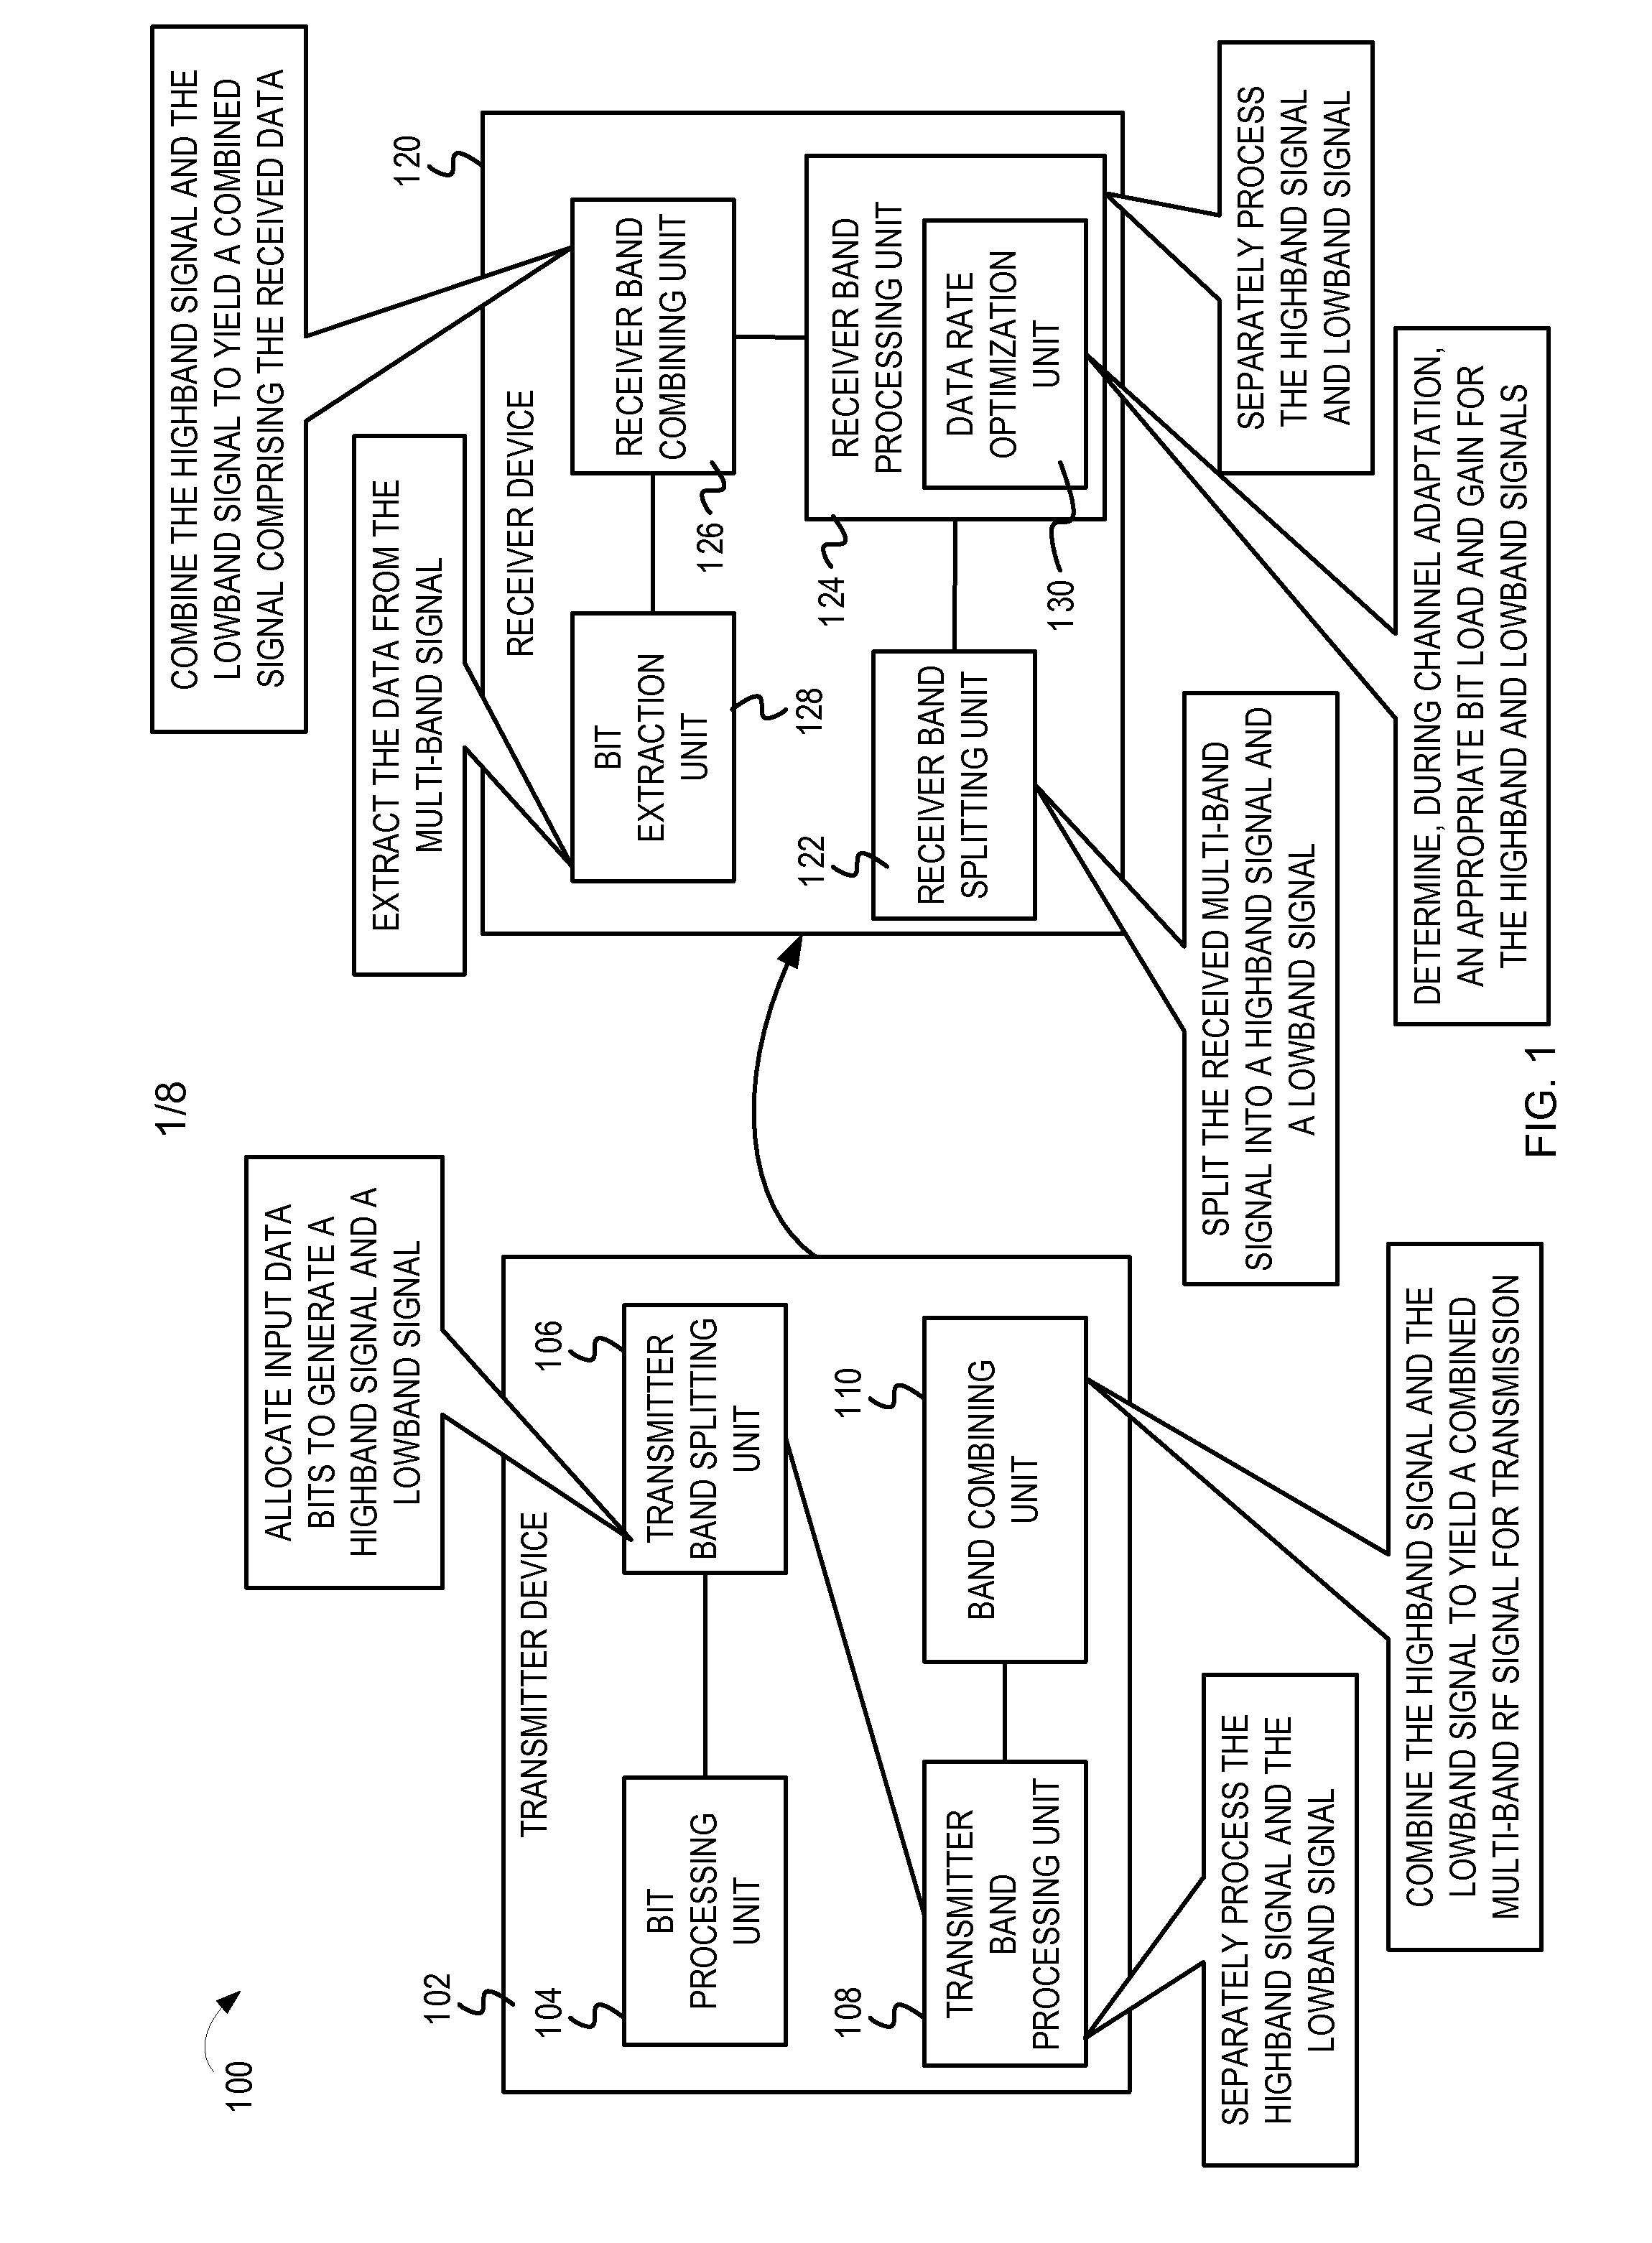 Optimizing data rate of multi-band multi-carrier communication systems